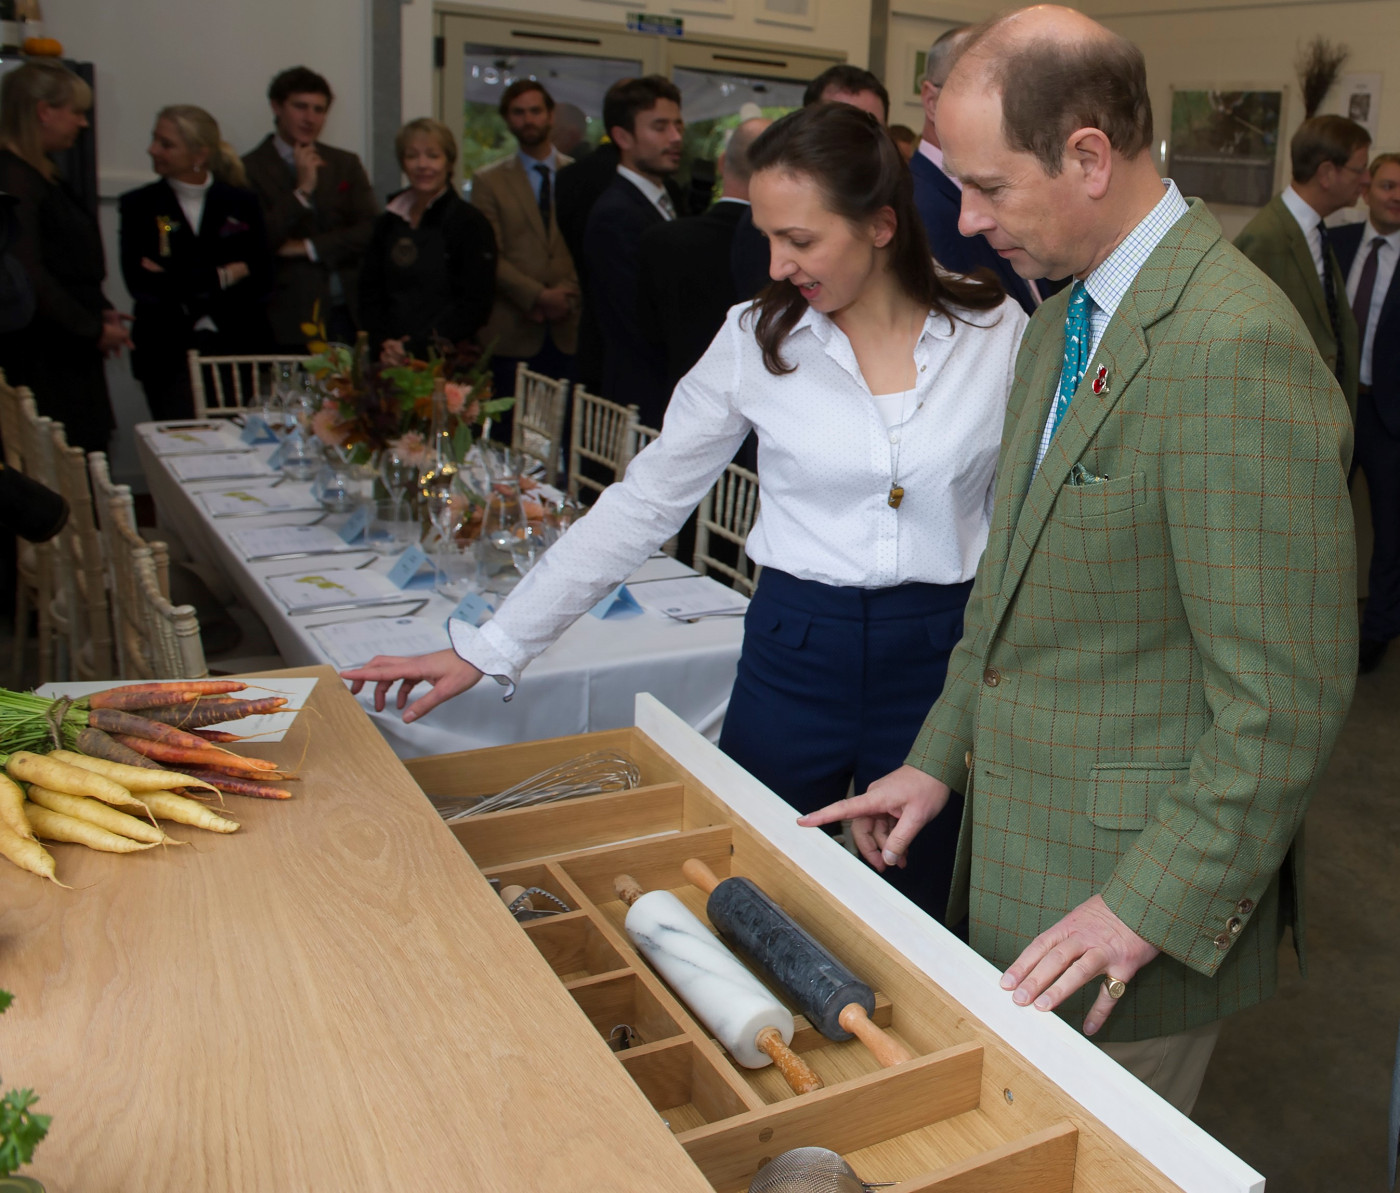 Shere Kitchens Meets HRH The Earl of Wessex